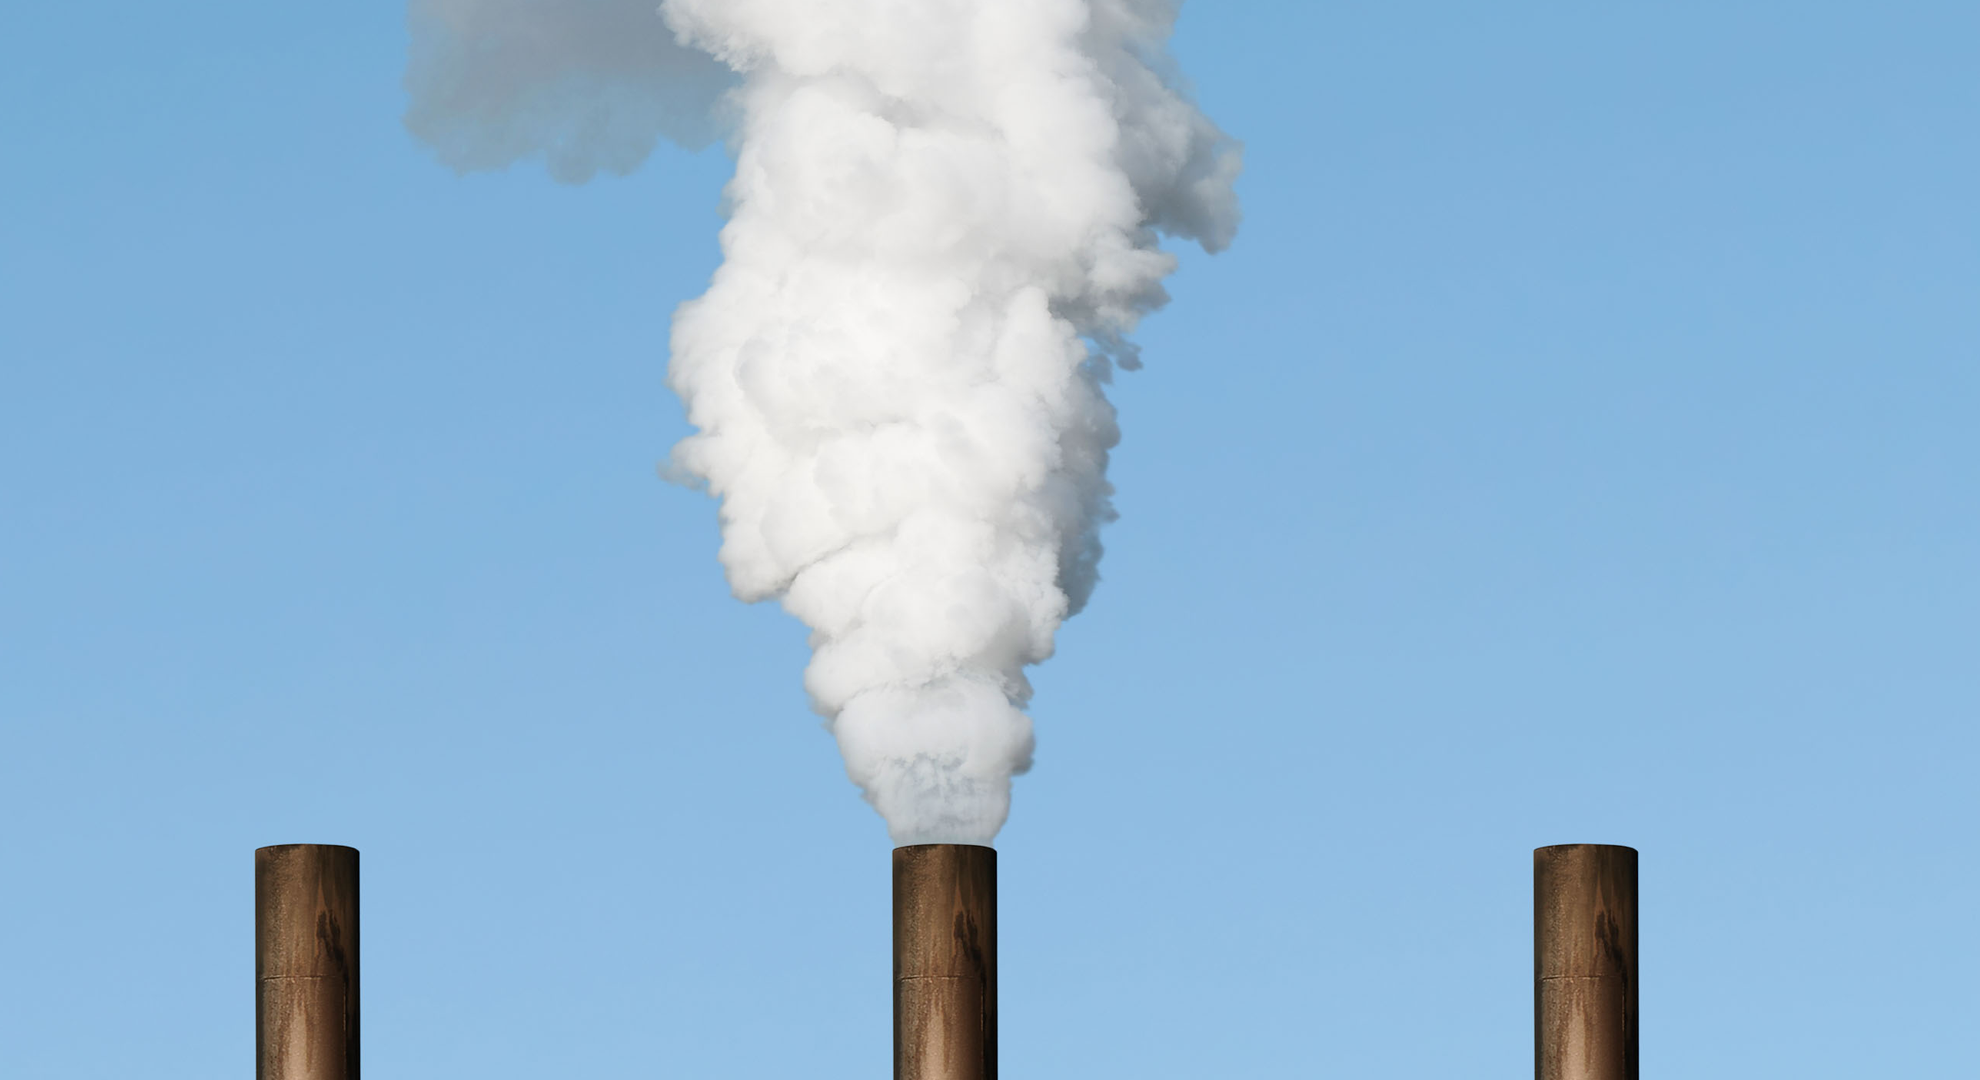 Three large chimneys, with one releasing a white cloud of smoke